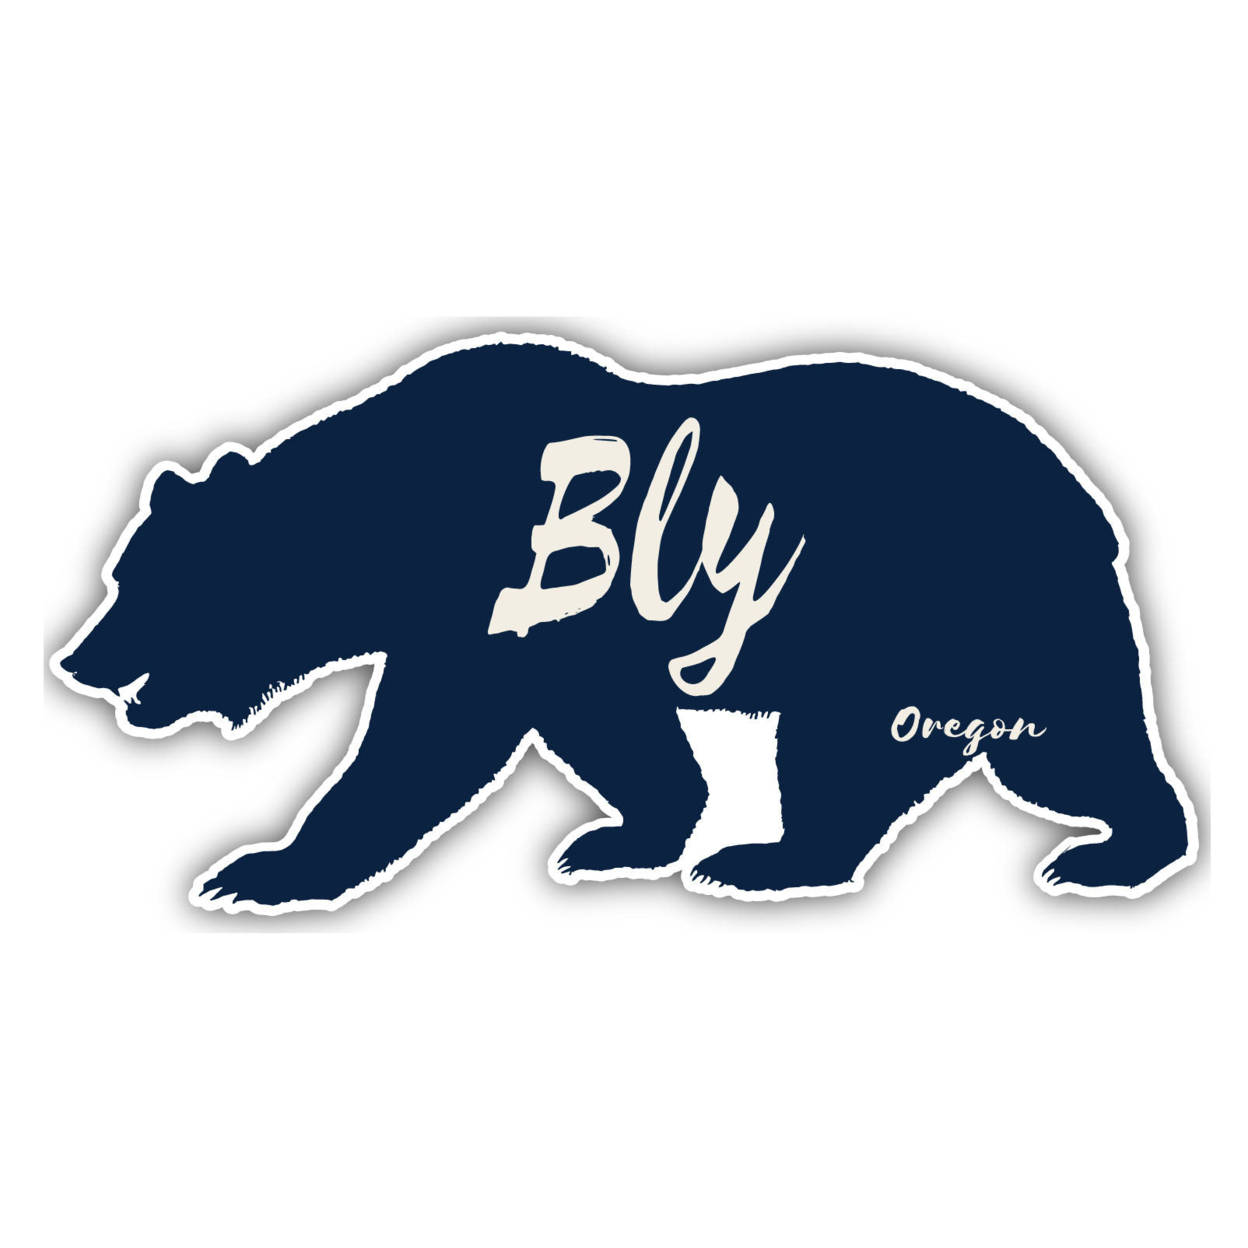 Bly Oregon Souvenir Decorative Stickers (Choose Theme And Size) - 4-Pack, 2-Inch, Great Outdoors